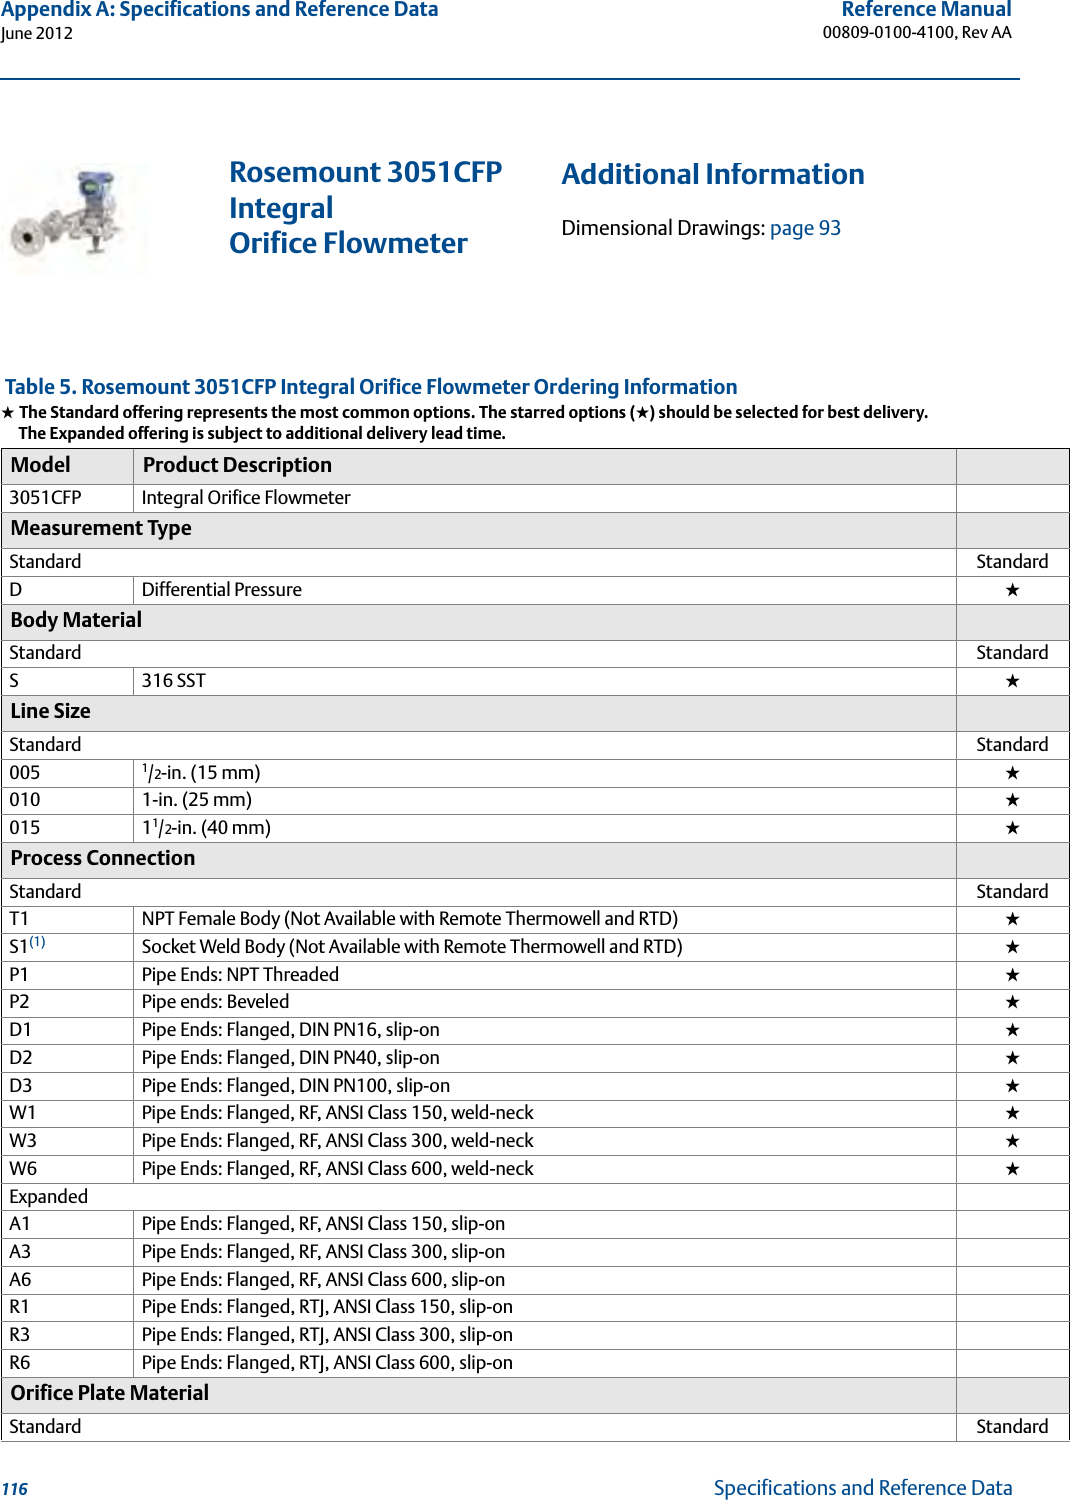 116Reference Manual00809-0100-4100, Rev AAAppendix A: Specifications and Reference DataJune 2012Specifications and Reference DataRosemount 3051CFP Integral Orifice Flowmeter Table 5. Rosemount 3051CFP Integral Orifice Flowmeter Ordering Information★ The Standard offering represents the most common options. The starred options (★) should be selected for best delivery.__The Expanded offering is subject to additional delivery lead time.Model Product Description3051CFP Integral Orifice FlowmeterMeasurement TypeStandard StandardDDifferential Pressure  ★Body MaterialStandard StandardS316 SST ★Line SizeStandard Standard005 1/2-in. (15 mm) ★010 1-in. (25 mm) ★015 11/2-in. (40 mm) ★Process ConnectionStandard StandardT1 NPT Female Body (Not Available with Remote Thermowell and RTD) ★S1(1) Socket Weld Body (Not Available with Remote Thermowell and RTD) ★P1 Pipe Ends: NPT Threaded ★P2 Pipe ends: Beveled  ★D1 Pipe Ends: Flanged, DIN PN16, slip-on ★D2 Pipe Ends: Flanged, DIN PN40, slip-on ★D3 Pipe Ends: Flanged, DIN PN100, slip-on ★W1 Pipe Ends: Flanged, RF, ANSI Class 150, weld-neck ★W3 Pipe Ends: Flanged, RF, ANSI Class 300, weld-neck ★W6 Pipe Ends: Flanged, RF, ANSI Class 600, weld-neck ★ExpandedA1 Pipe Ends: Flanged, RF, ANSI Class 150, slip-onA3 Pipe Ends: Flanged, RF, ANSI Class 300, slip-onA6 Pipe Ends: Flanged, RF, ANSI Class 600, slip-onR1 Pipe Ends: Flanged, RTJ, ANSI Class 150, slip-onR3 Pipe Ends: Flanged, RTJ, ANSI Class 300, slip-onR6 Pipe Ends: Flanged, RTJ, ANSI Class 600, slip-onOrifice Plate MaterialStandard StandardAdditional InformationDimensional Drawings: page 93